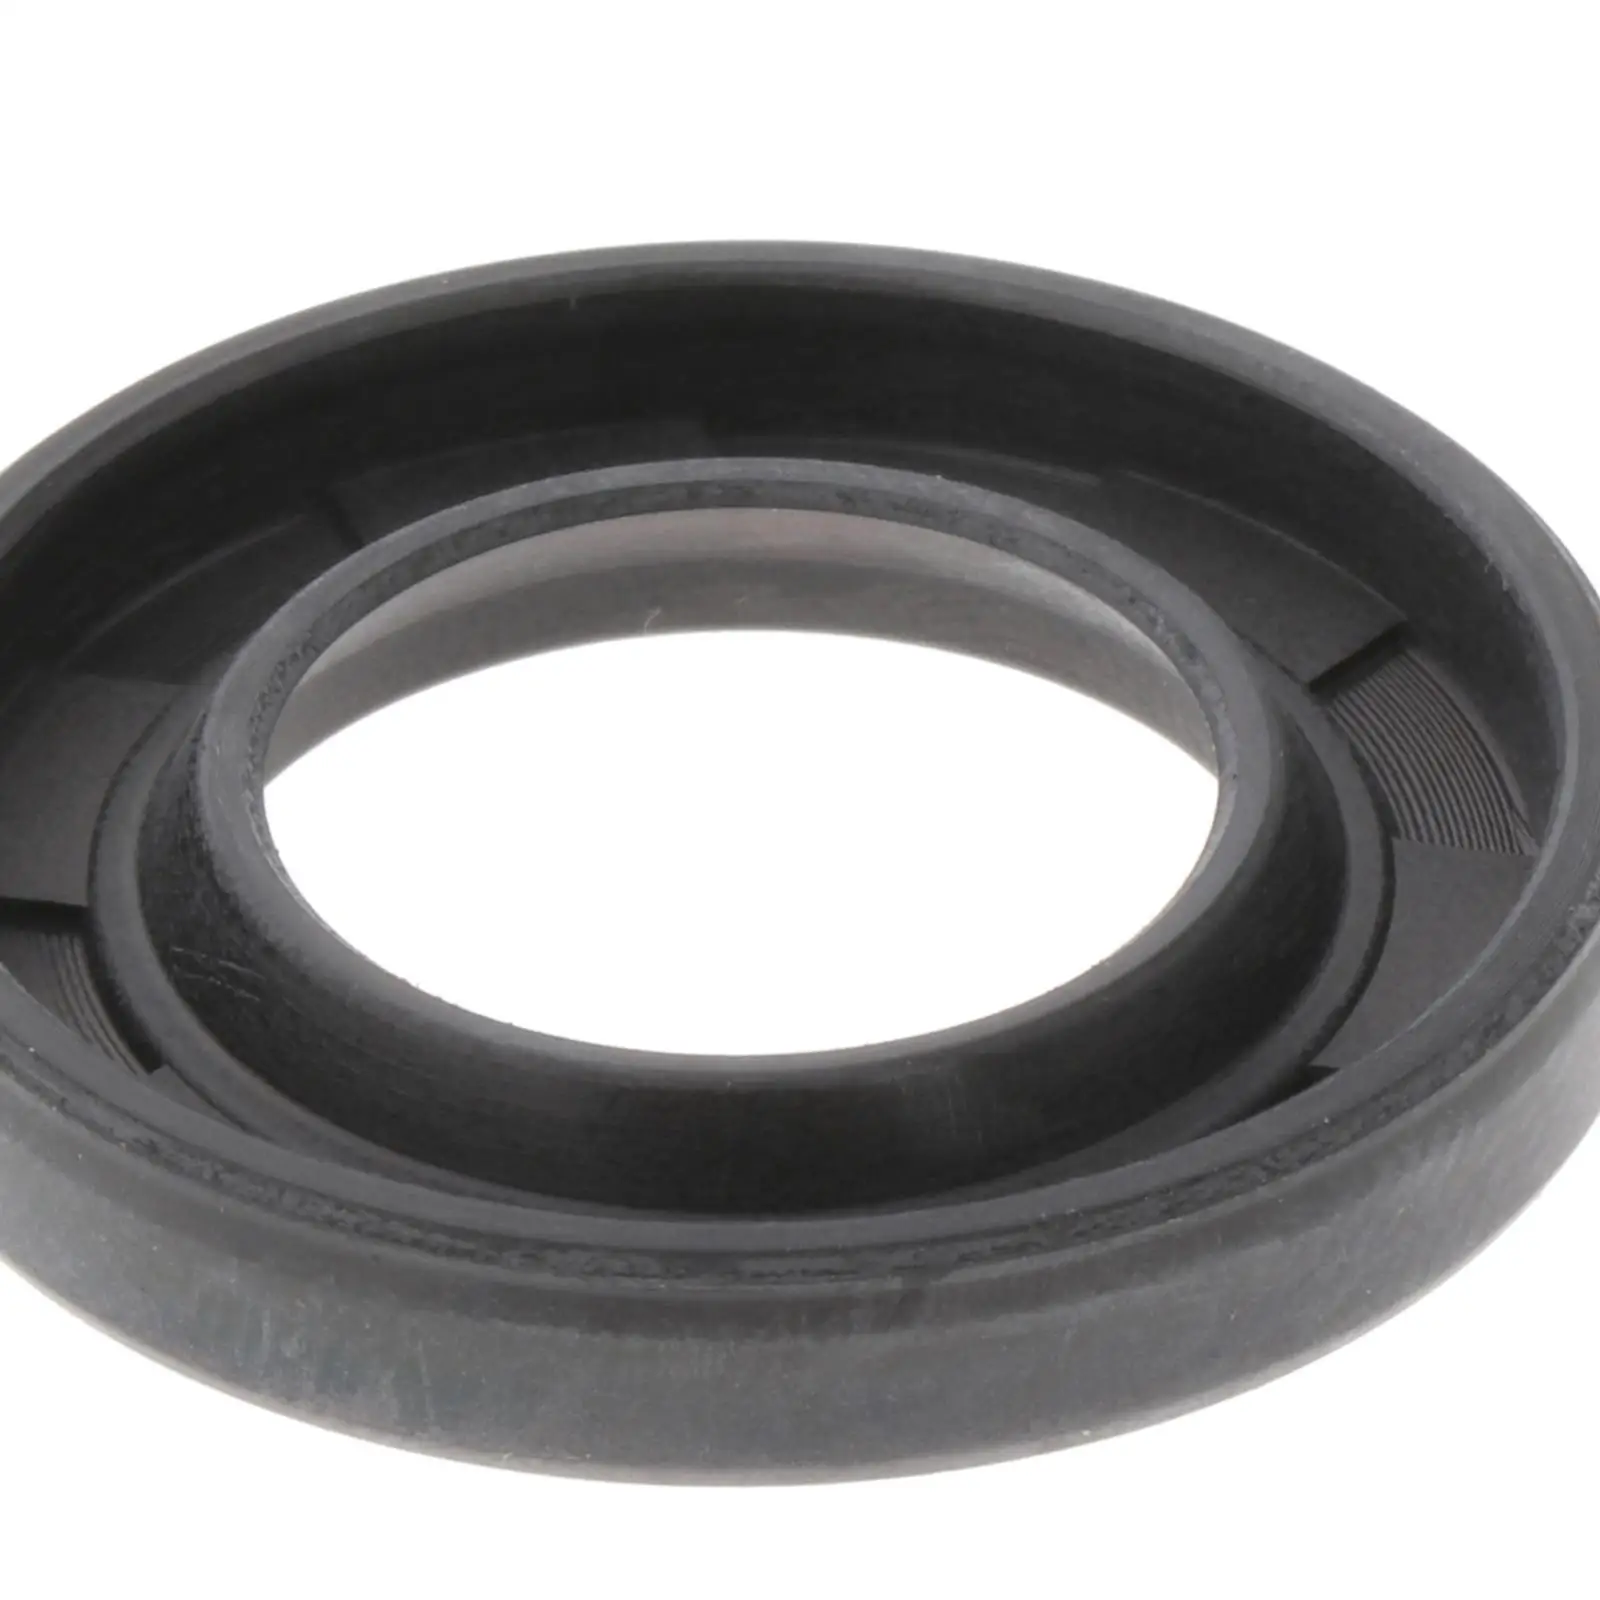 Oil Seal Spare Parts 93106-18M01 for Yamaha Outboard 60HP 70HP 2 Stroke 3cyl Lower Crankshaft Outboard Engine